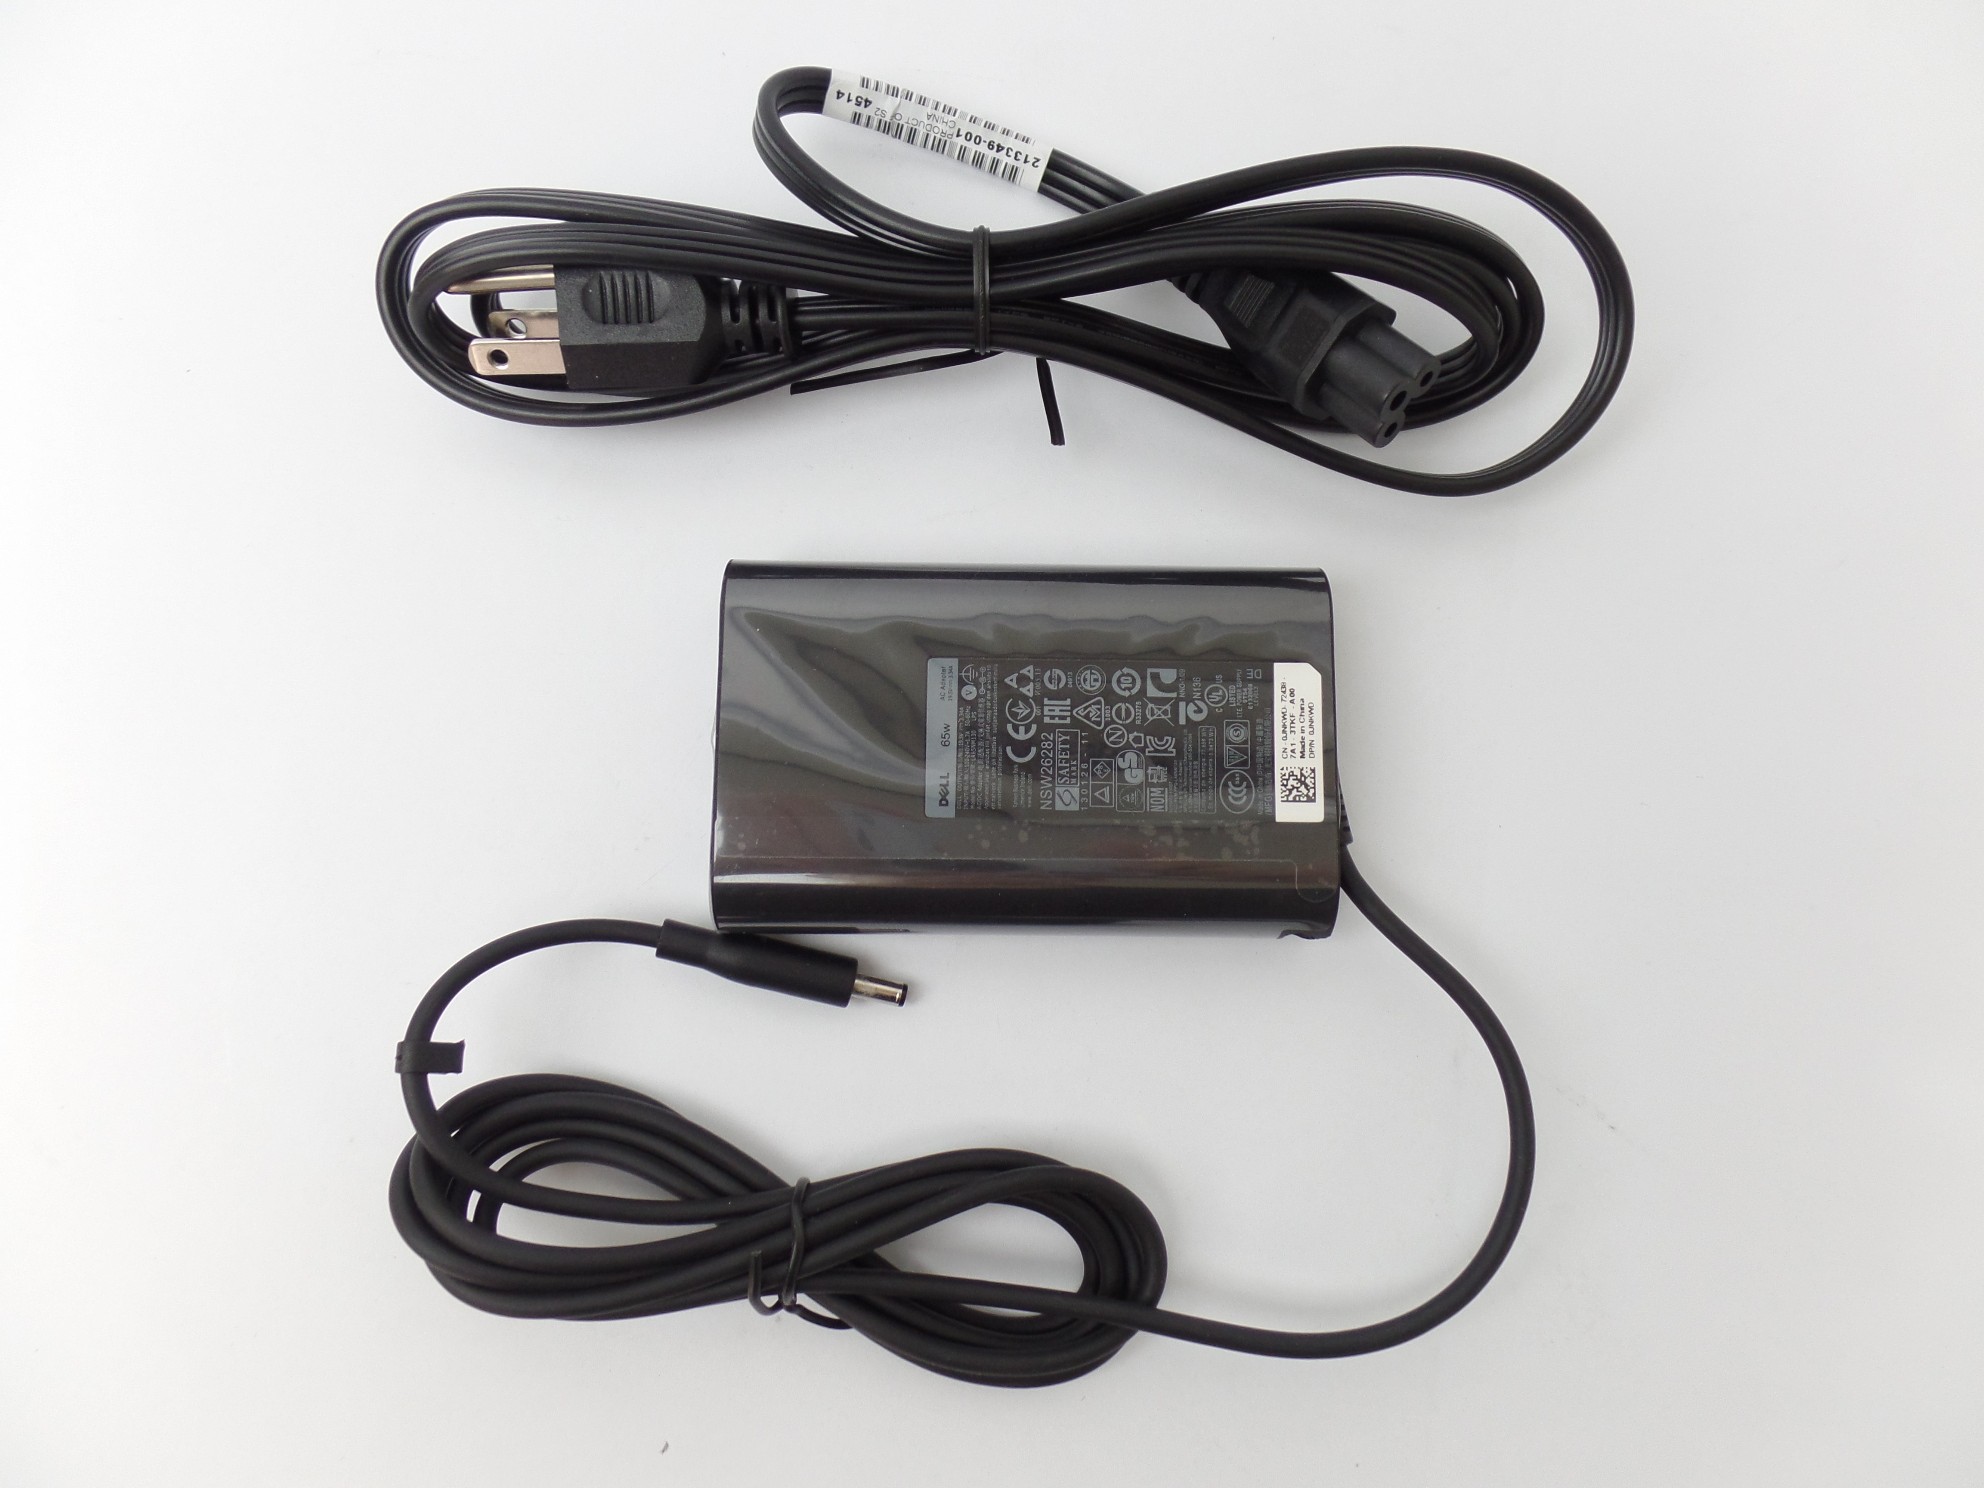 Charger AC Adapter 65W Power Supply for Dell Inspiron 3452 3458 3551 3558 3559